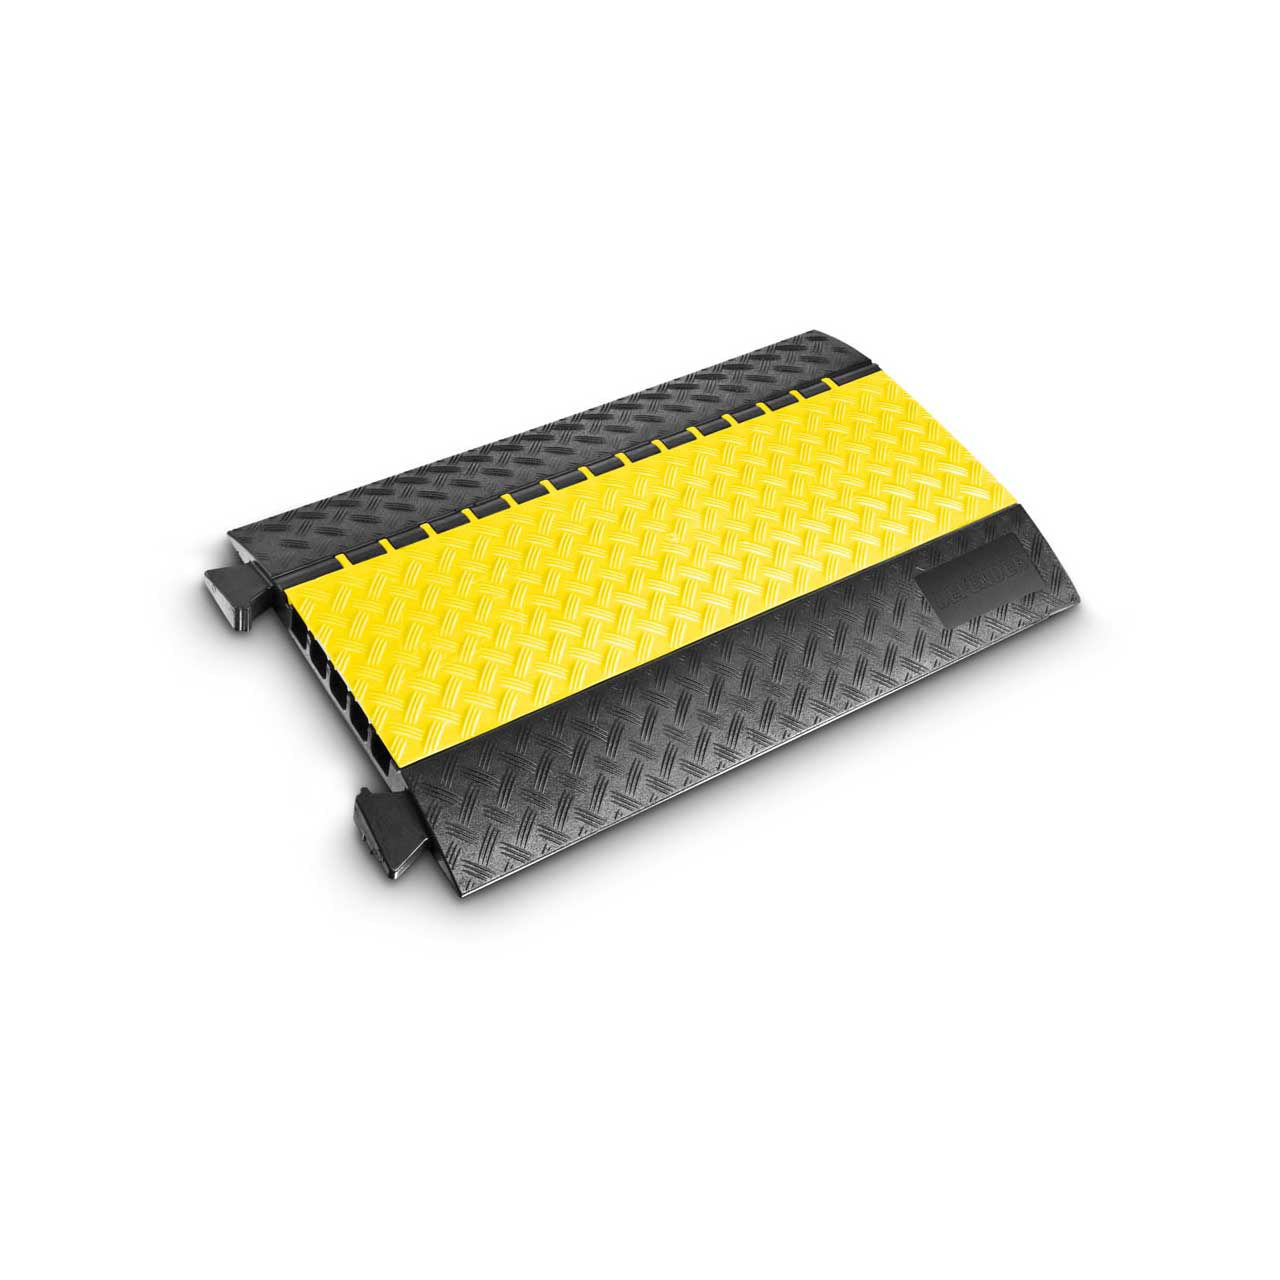 Defender DEF-85300 MIDI 5-Channel Medium Cable Protector Yellow/Black  87x21.1x2.1 Inches